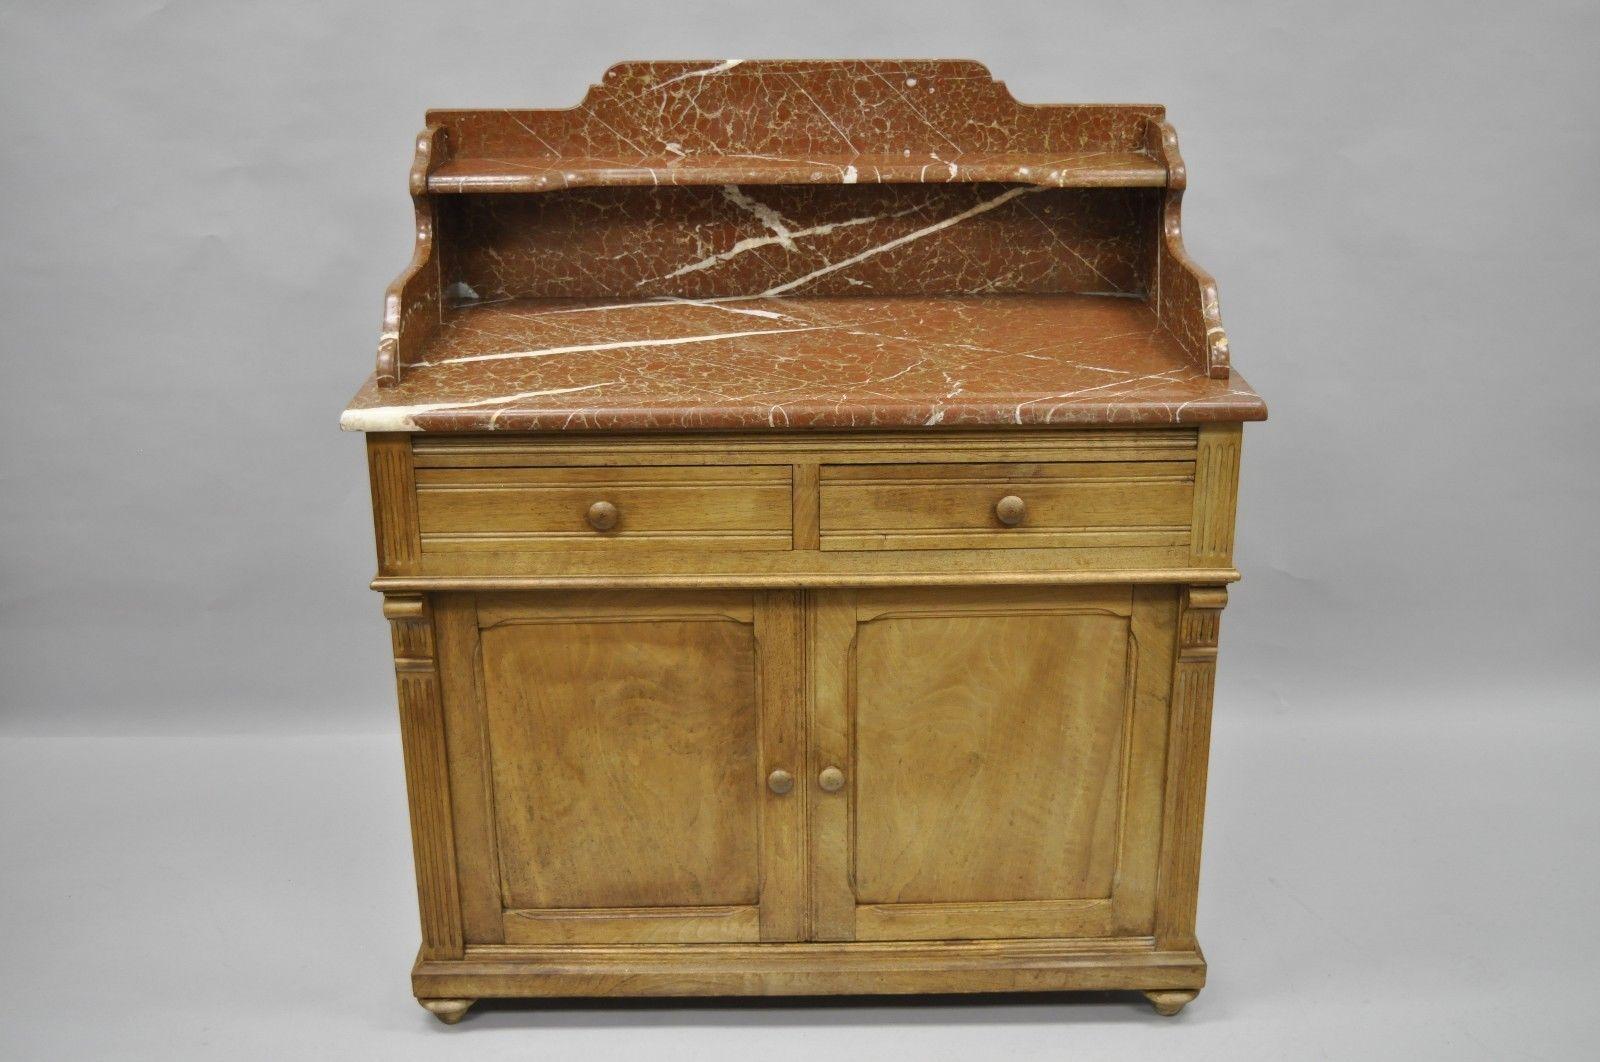 Antique Victorian marble-top commode. Item features beautiful tall earth tone marble back splash, two dovetailed drawer, lower storage cabinet doors, interior shelf, stunning overall form. Very rare marble and style, circa 1900, believed to be